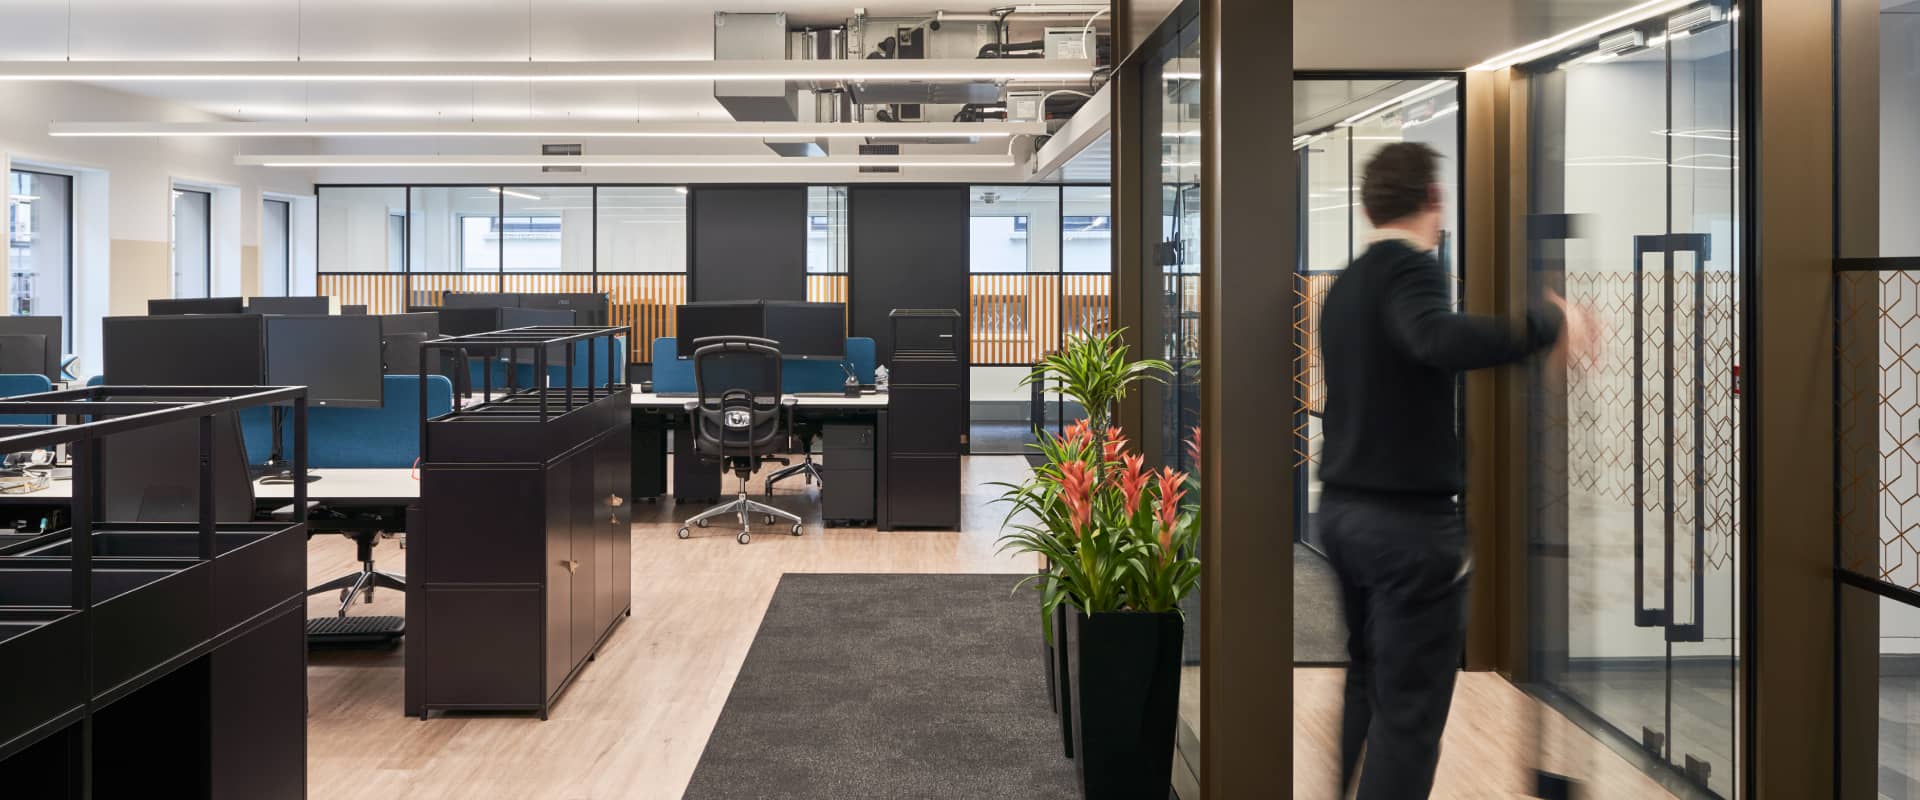 modern workspace design fit out for Brightbay by Cleo d&b